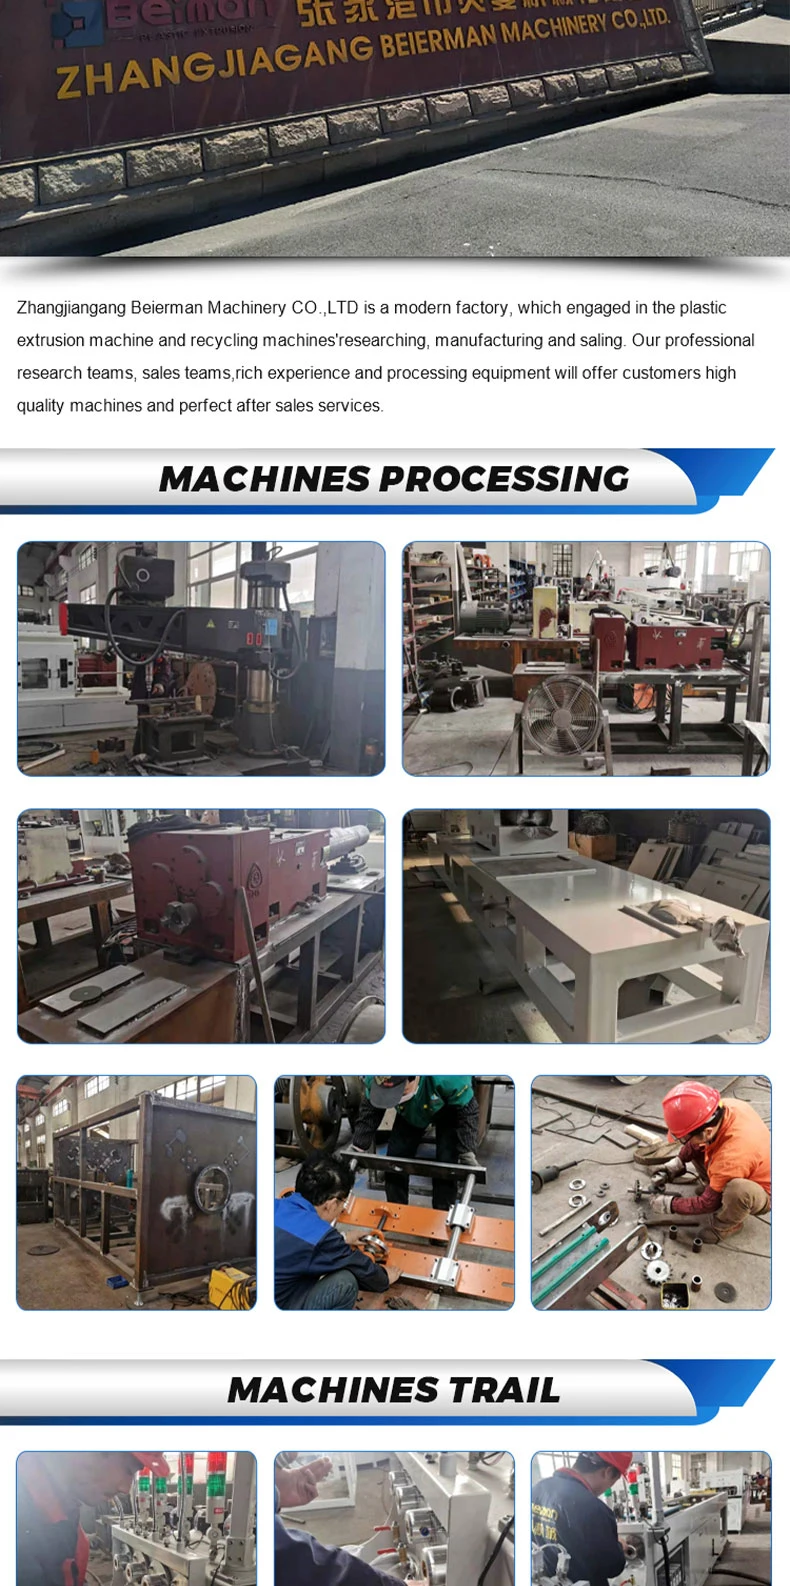 Electrical Protection HDPE PVC Plastic Corrugated Pipe Hose Tube Extruder Machine Production Line Manufacturing Plant Equipment